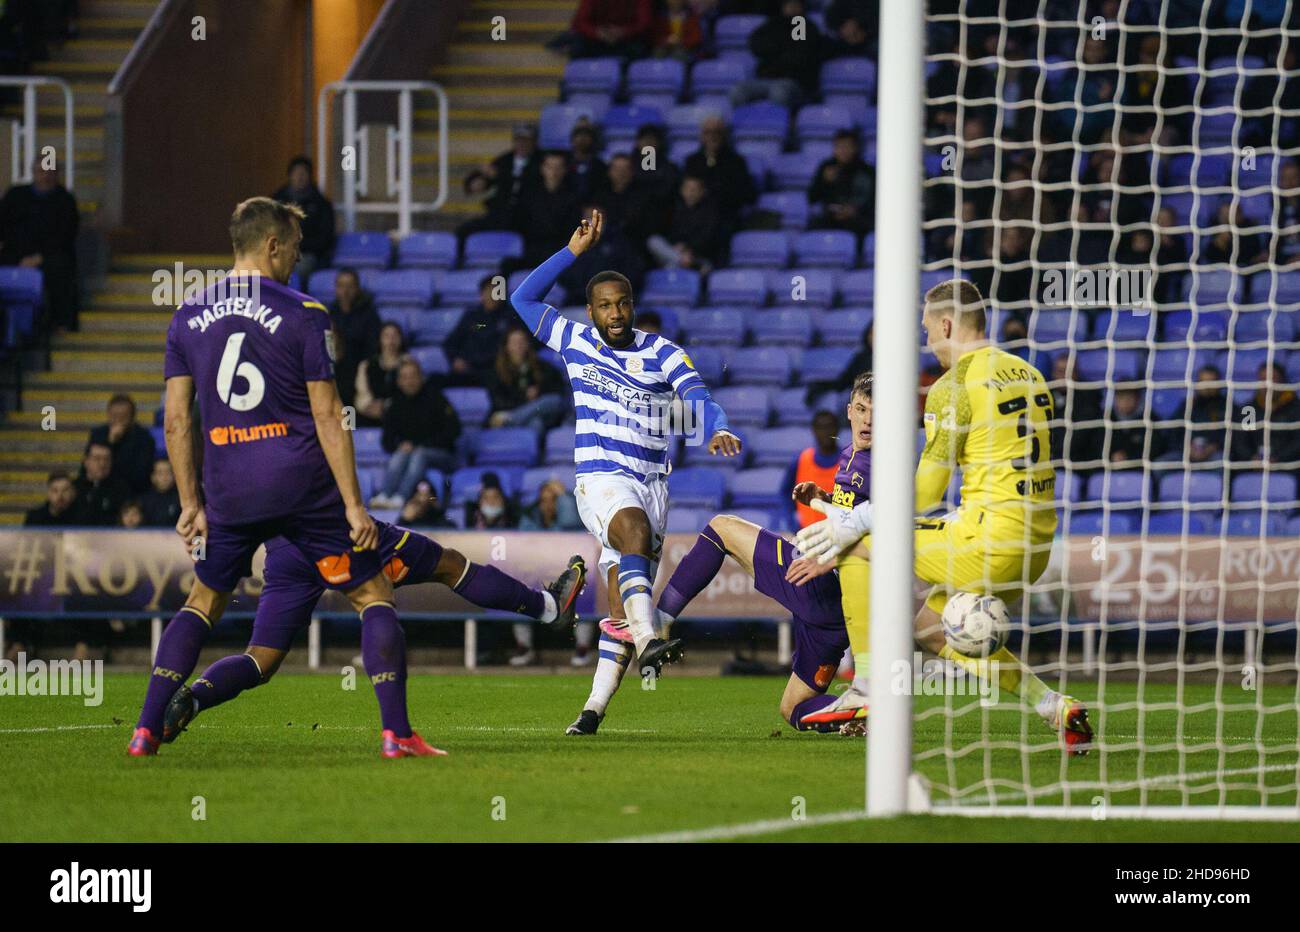 https://c8.alamy.com/comp/2HD96HD/reading-uk-03rd-jan-2022-junior-hoilett-of-reading-scores-his-second-goal-during-the-sky-bet-championship-match-between-reading-and-derby-county-at-the-madejski-stadium-reading-england-on-3-january-2022-photo-by-andy-rowland-credit-prime-media-imagesalamy-live-news-2HD96HD.jpg